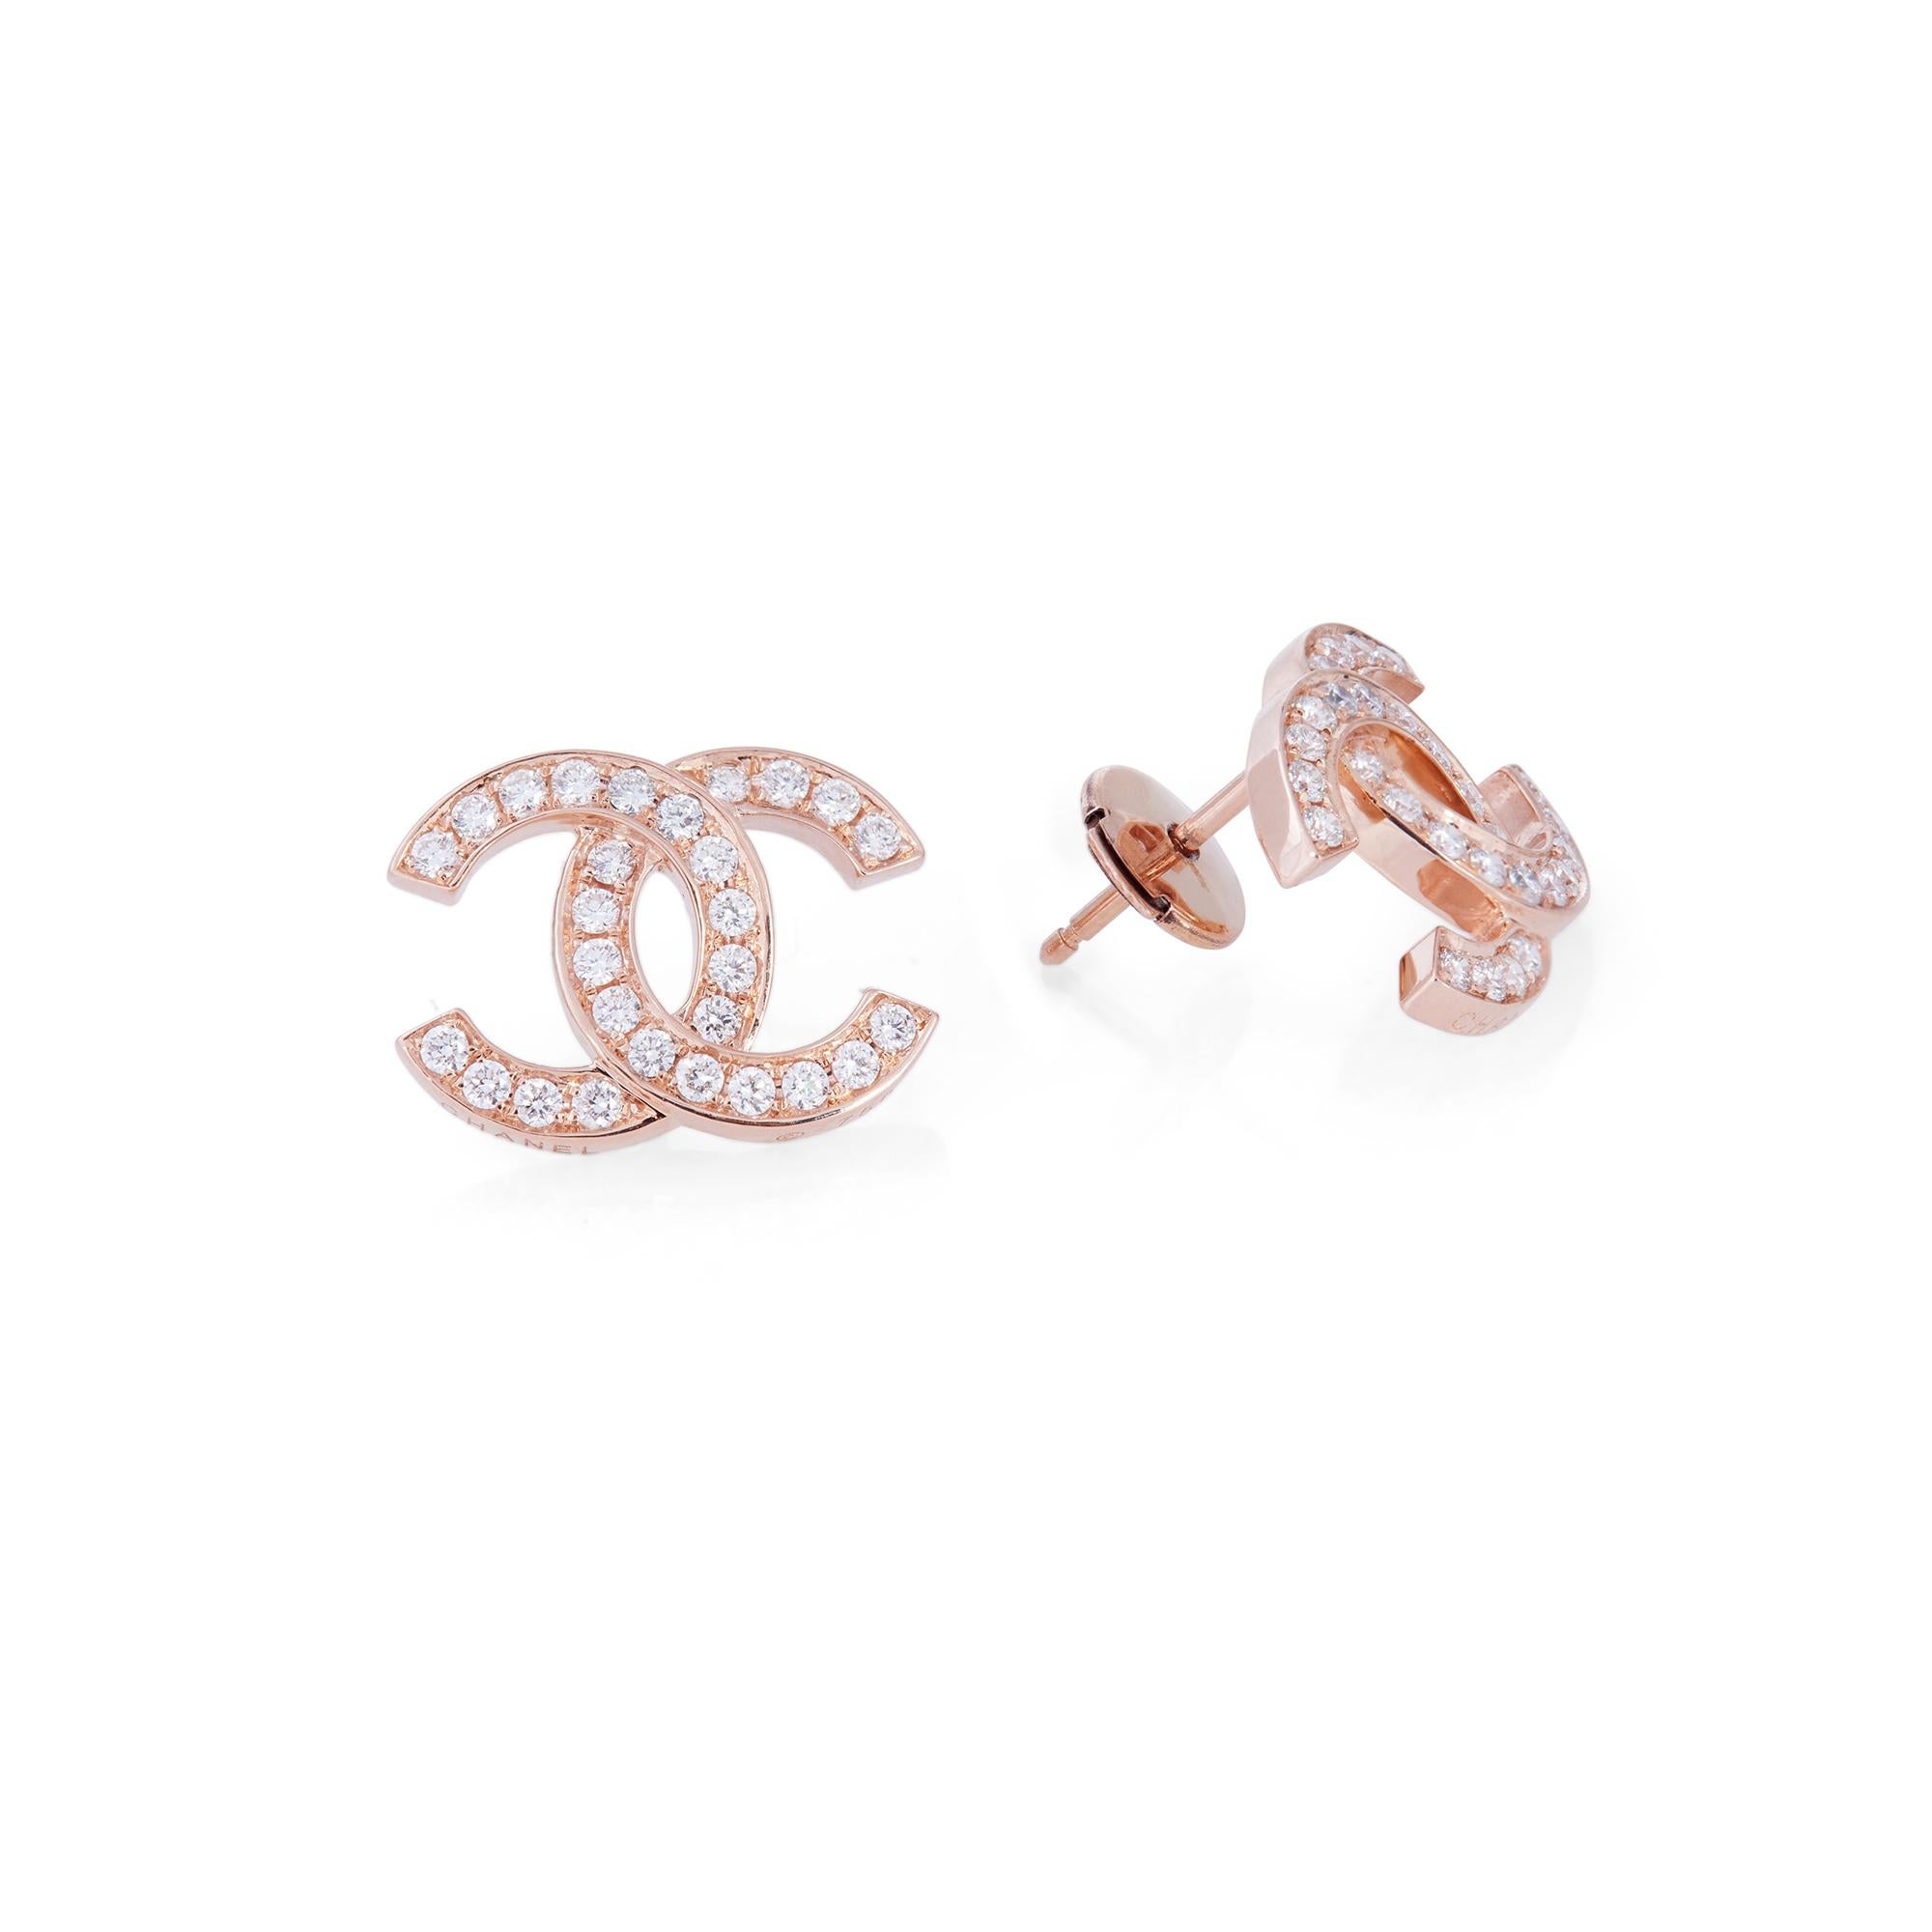 Authentic Chanel Double C earrings crafted in 18 karat rose gold and set with approximately .56 carats of high quality round diamonds.  The earrings measure .44 inches in length and .59 inches in width.  Signed Chanel, 750.  Earrings are not